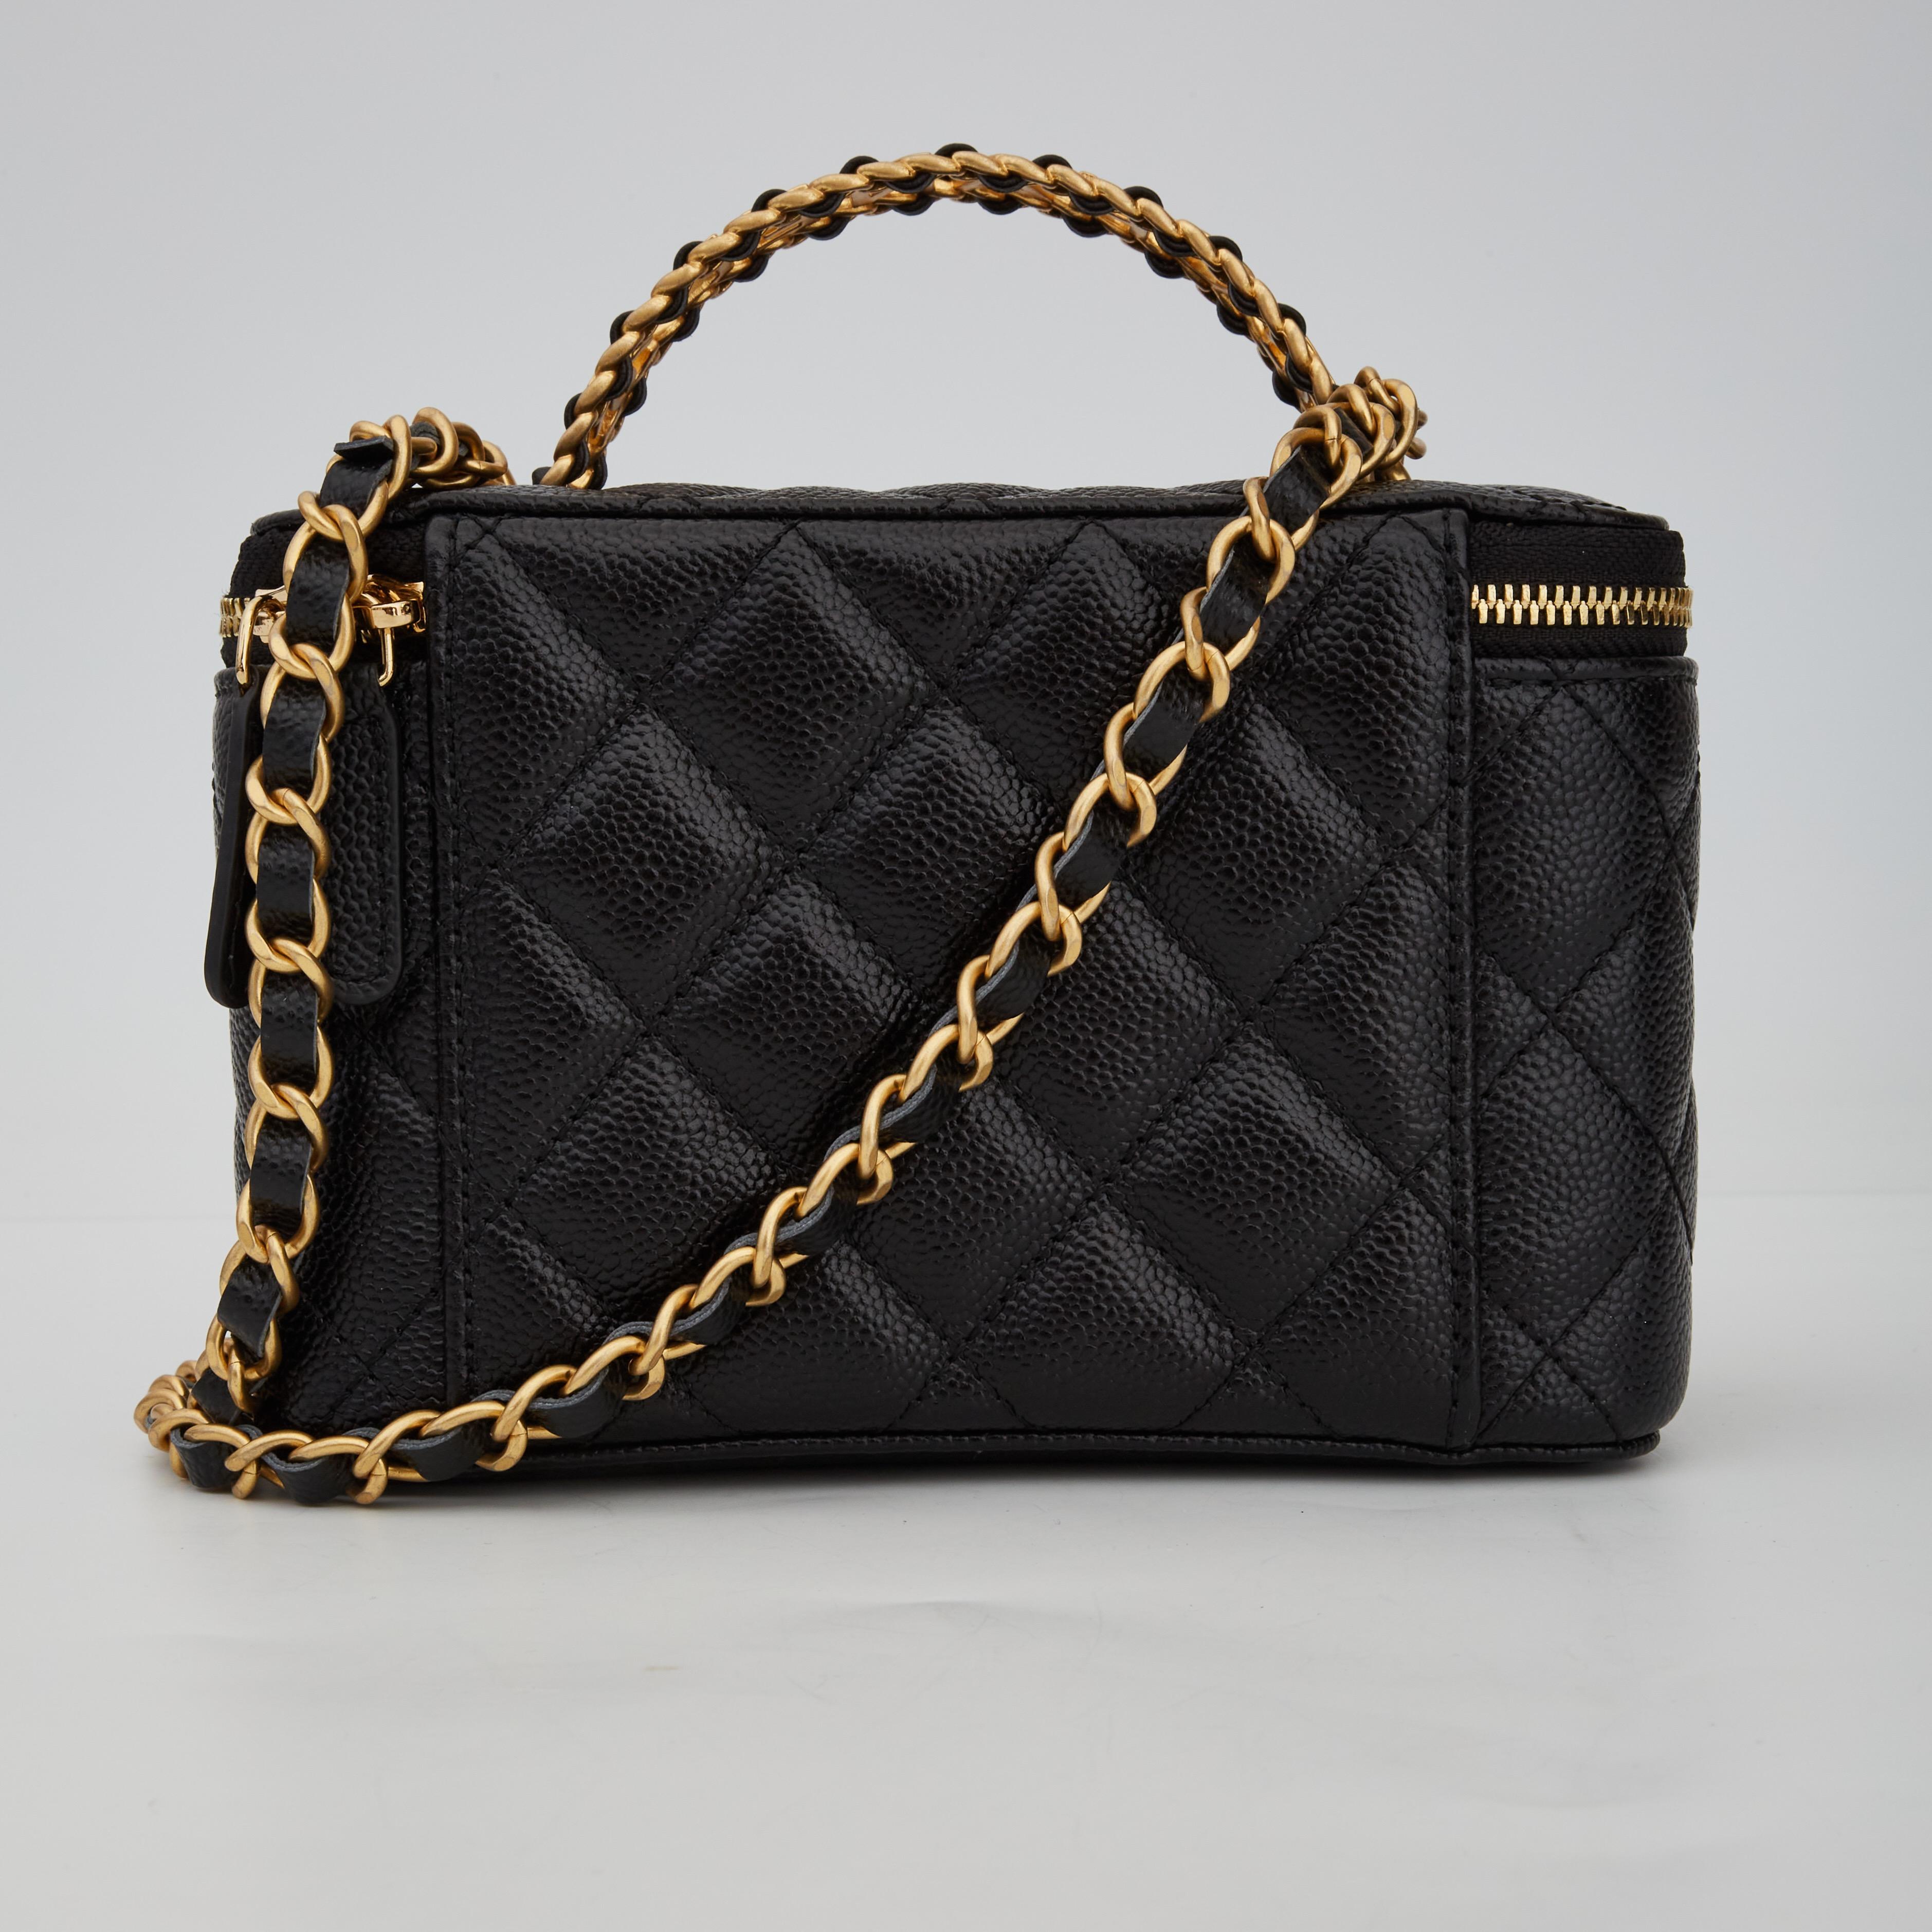 This shoulder bag is made of luxurious grained calfskin leather. The bag features a gold-toned chain interlaced with leather shoulder strap, a Chanel CC logo on the front, top zip closure, a unique top handle with CC logos with interlaced leather